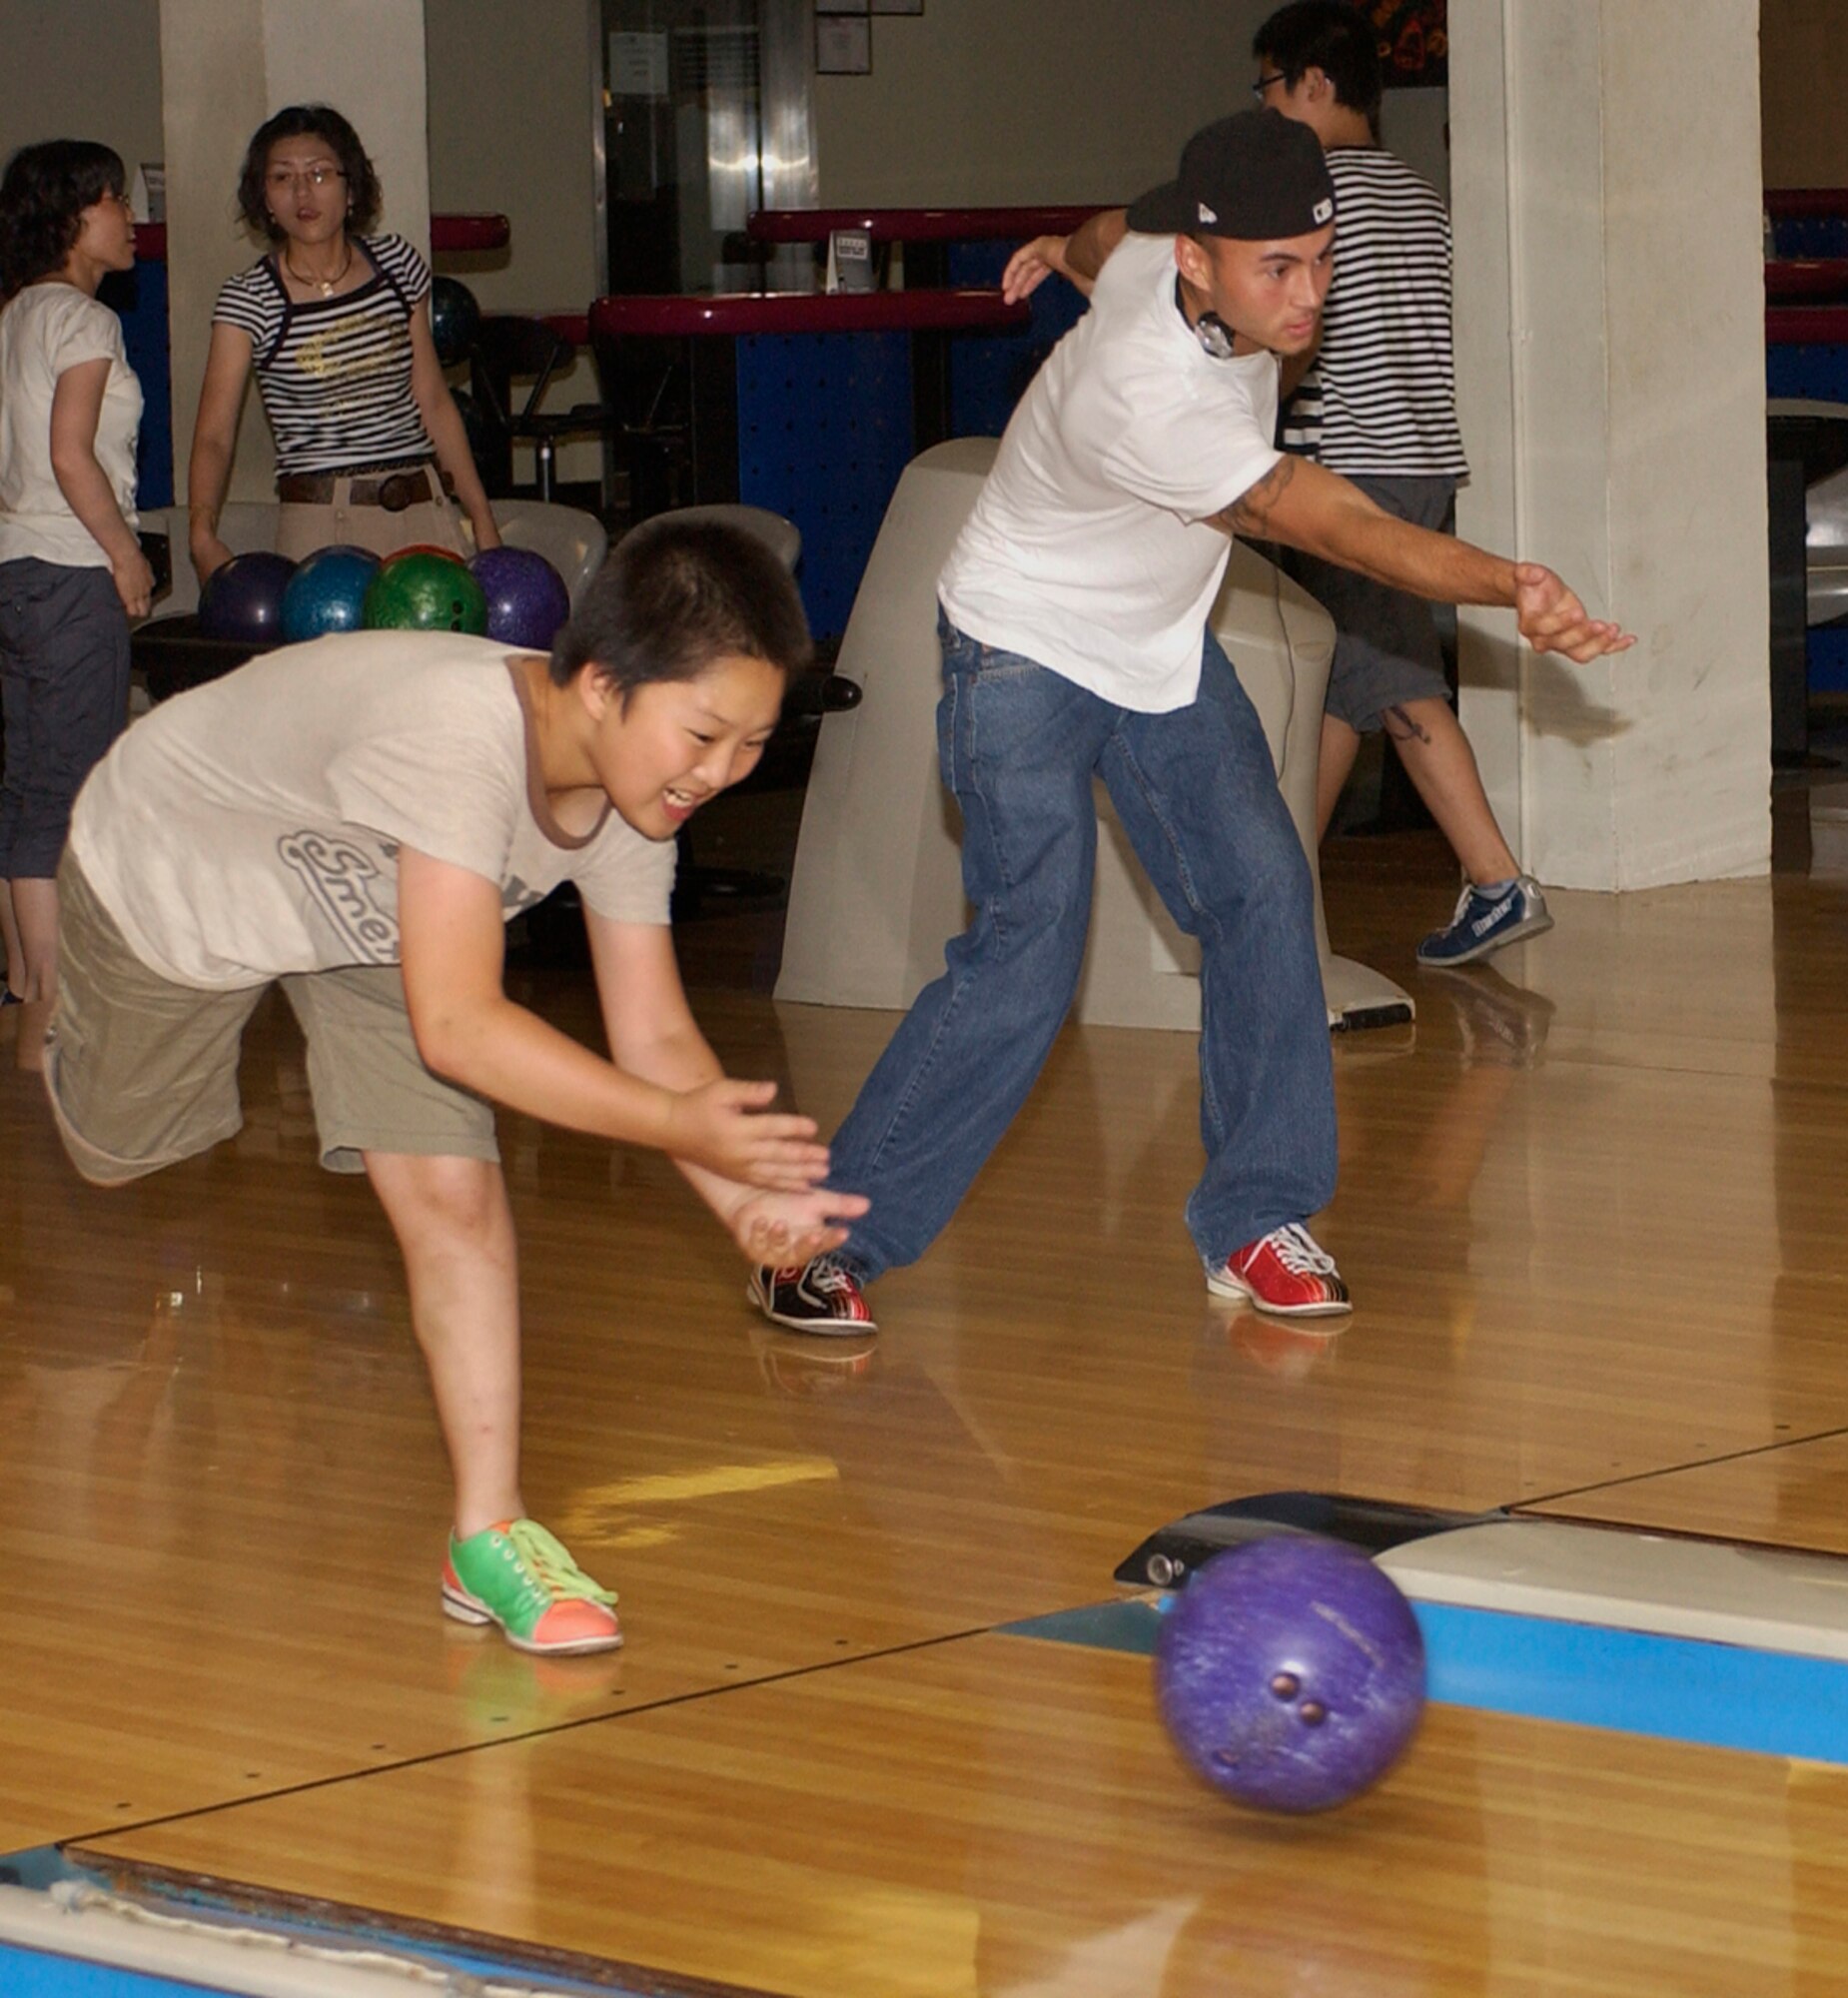 KUNSAN AIR BASE, Republic of Korea -- Airman 1st Class Joseph Putis, 8th Security Forces Squadron and In Song Pak bowling together at the bowling center on July 30 here. The 8th SFS hosted a bowling event with 17 children from a Gunsan City orphanage. (U.S. Air Force photo/SrA Giang Nguyen)

                               